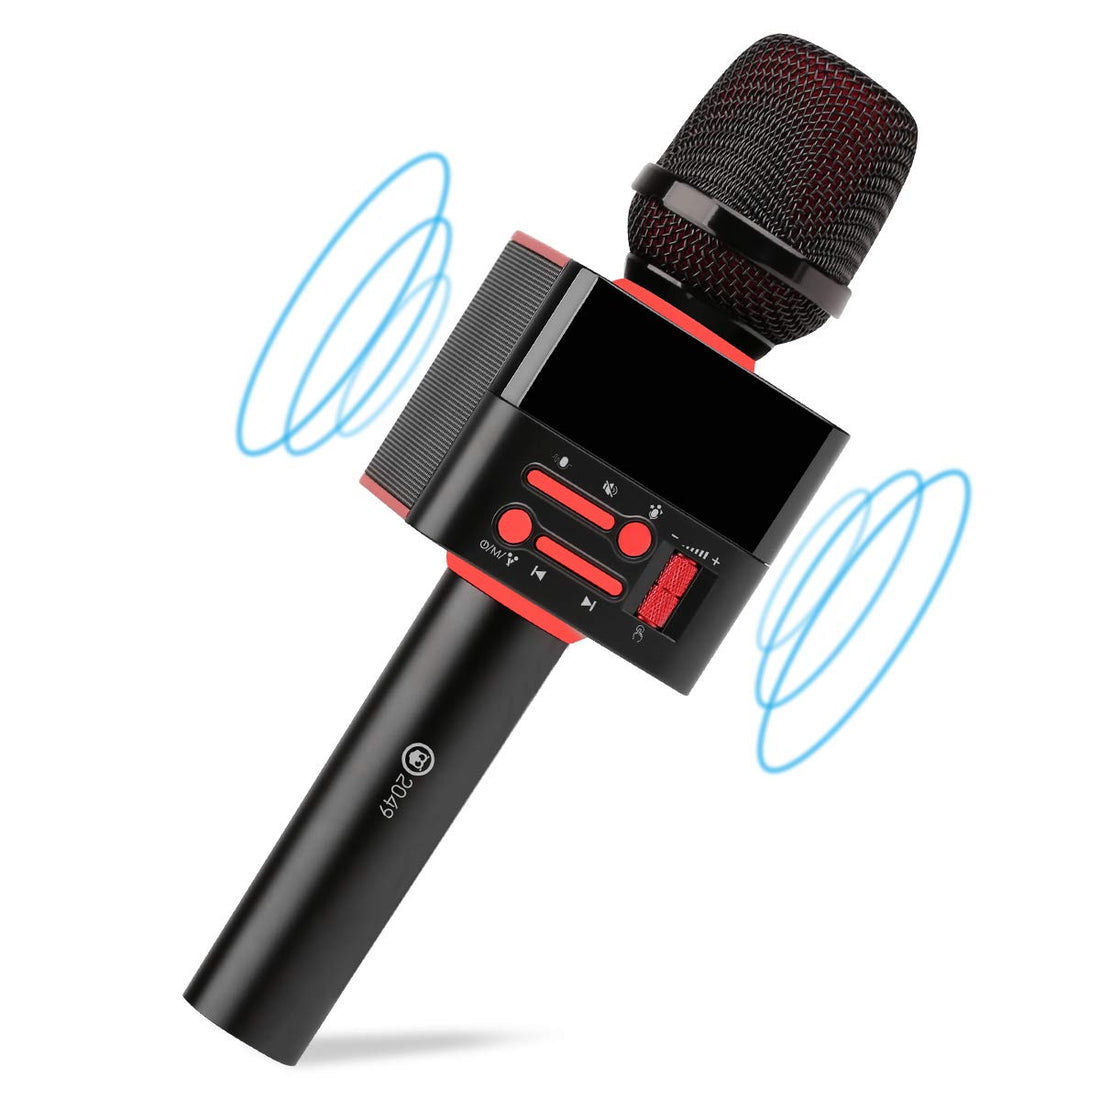 2049 X50 2x13w Cardioid Dynamic Karaoke Microphone, Handheld Wireless Bluetooth Karaoke Systems Karaoke Microphone for Home/Outdoor/Party/Classroom/Car Compatible with Smart phone/PC/Mp3/Mp4/TV